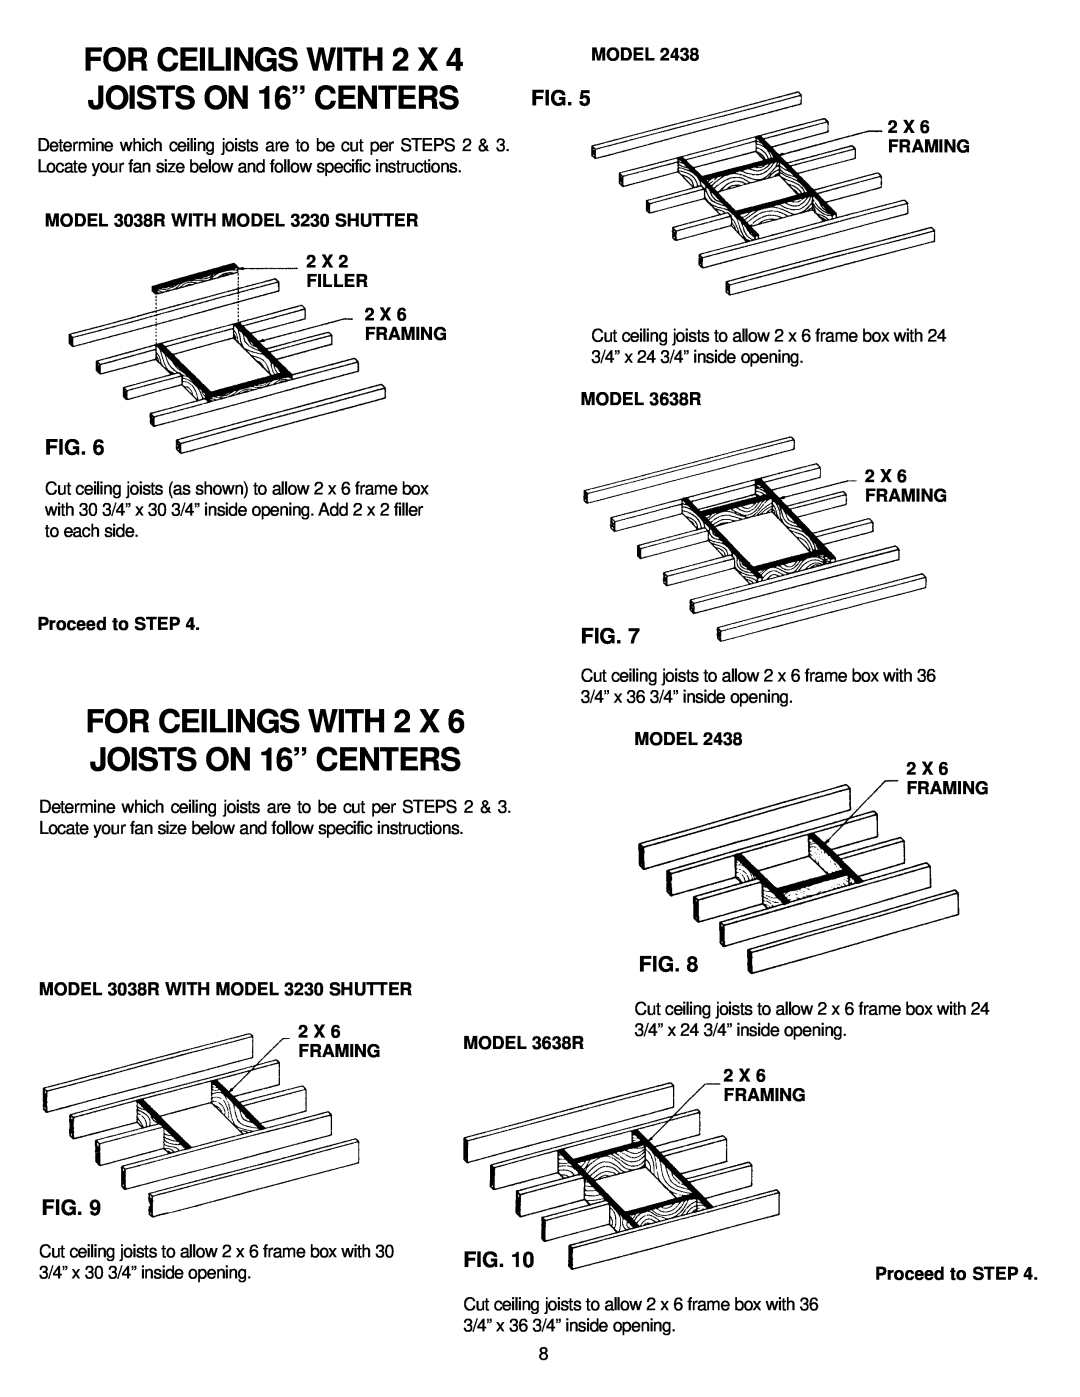 Marley Engineered Products 2438, 3638R, 3038R manual FOR CEILINGS WITH 2 X 4 JOISTS ON 16” CENTERS 